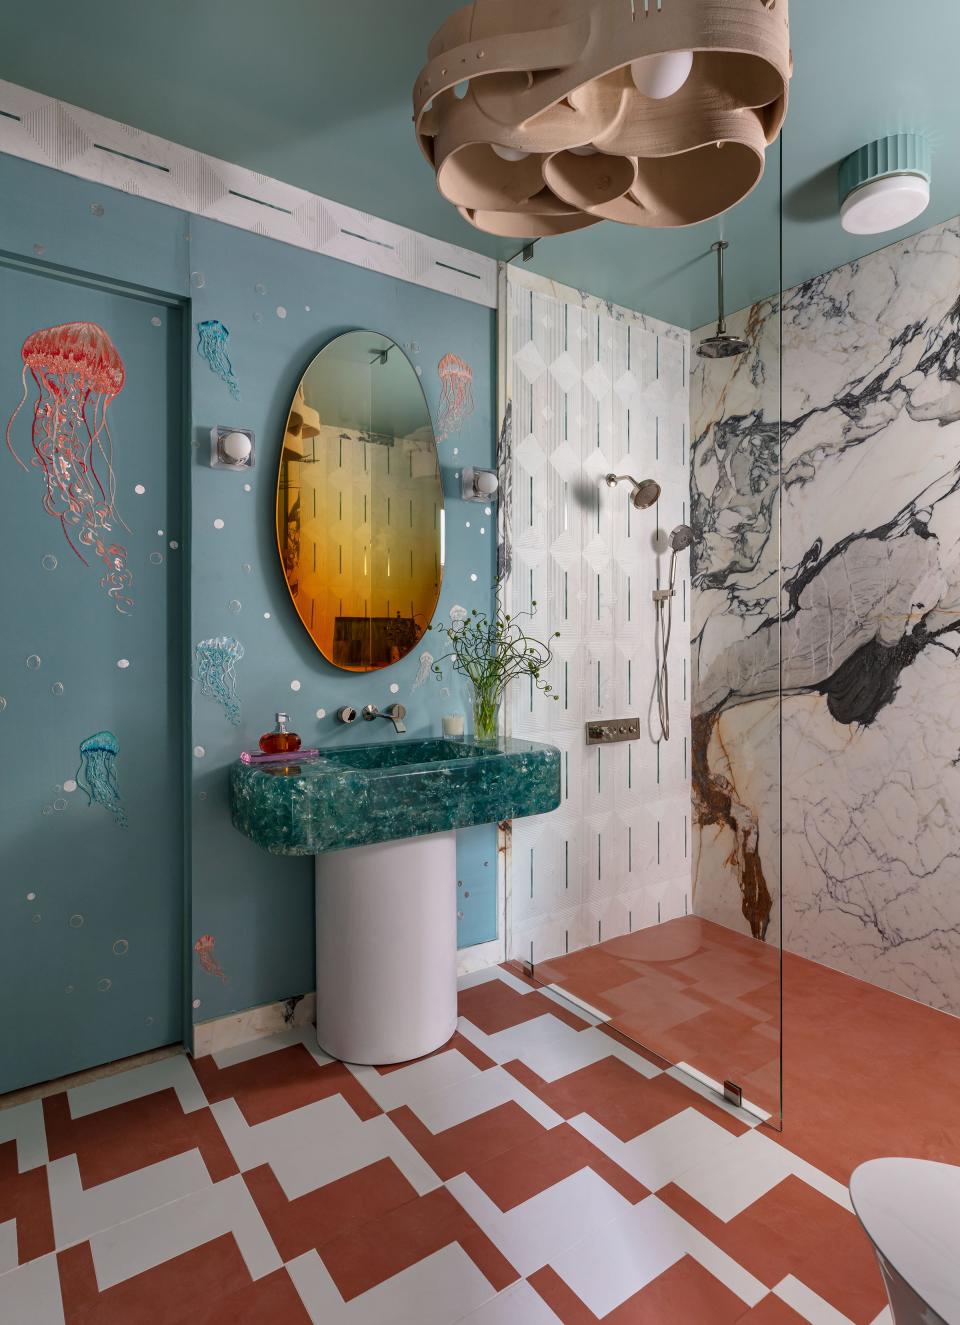 At the Kips Bay Decorator Show House Palm Beach, Helen Bergin's first-floor bathroom, with Kohler fixtures and faucets, features an underwater theme and a sink made of teal resin.